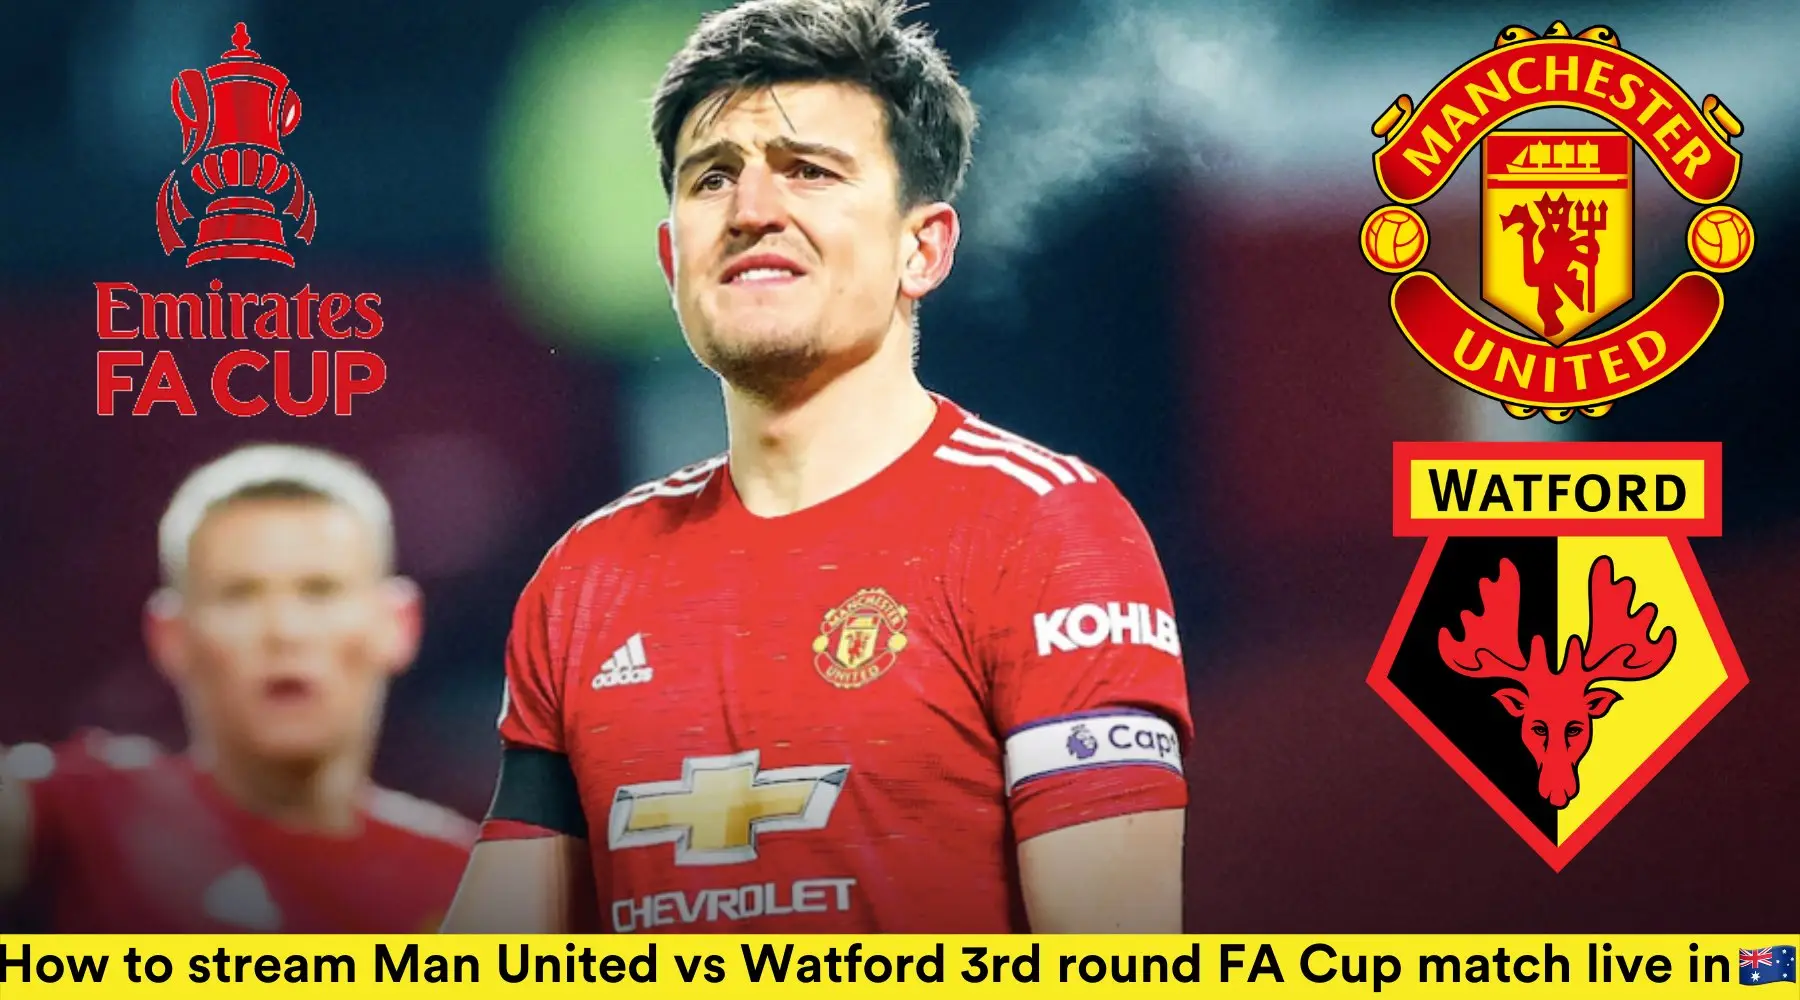 Man United vs Watford FA Cup: How to watch, start time